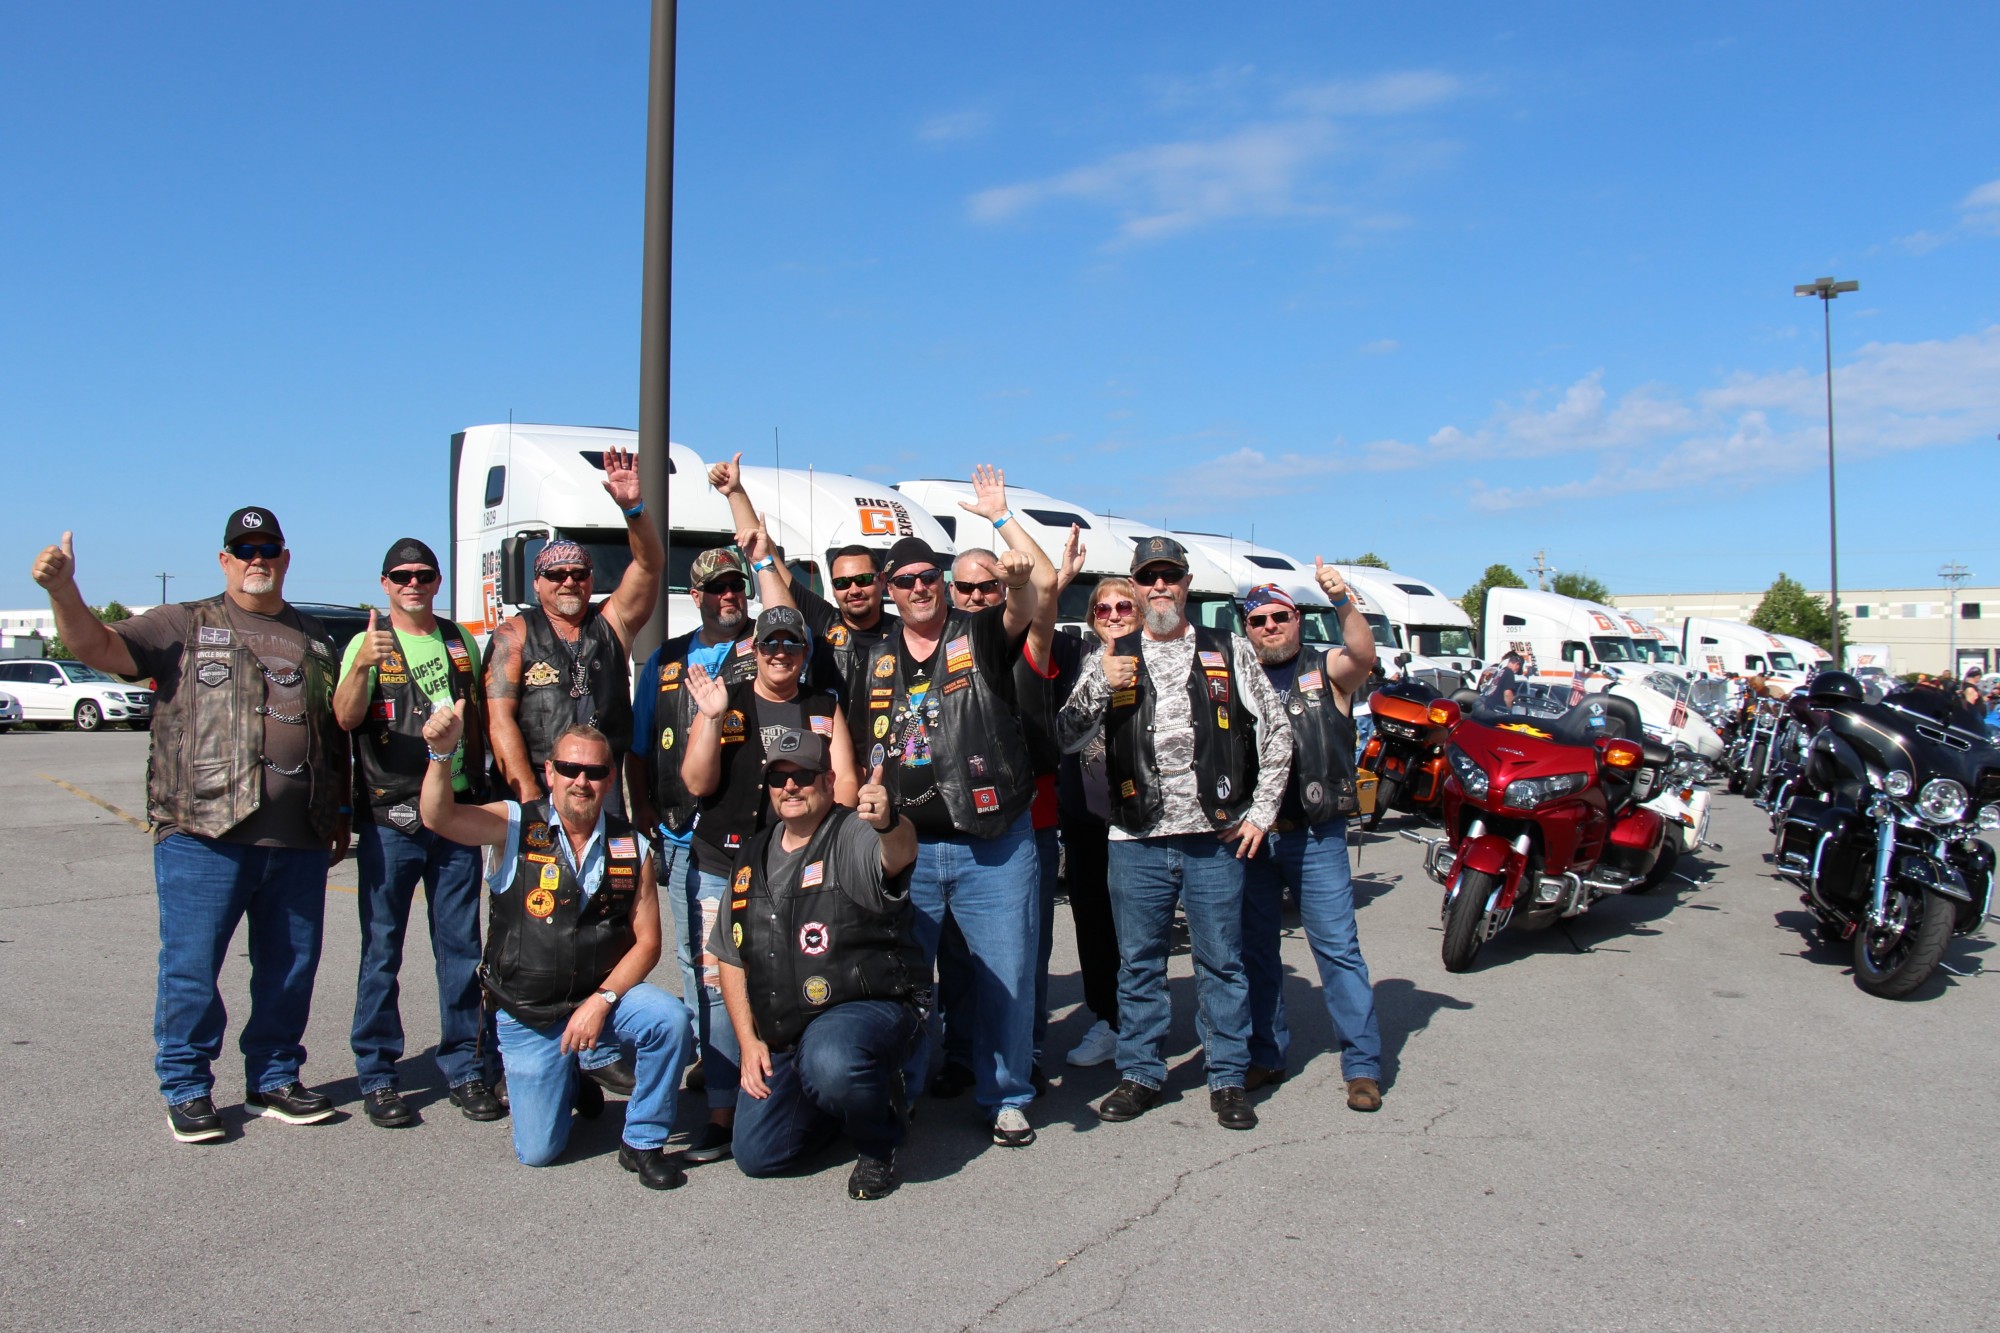 Big G Express More than Doubles Fundraising Goal with Motorcycle Ride Benefiting St. Jude's 